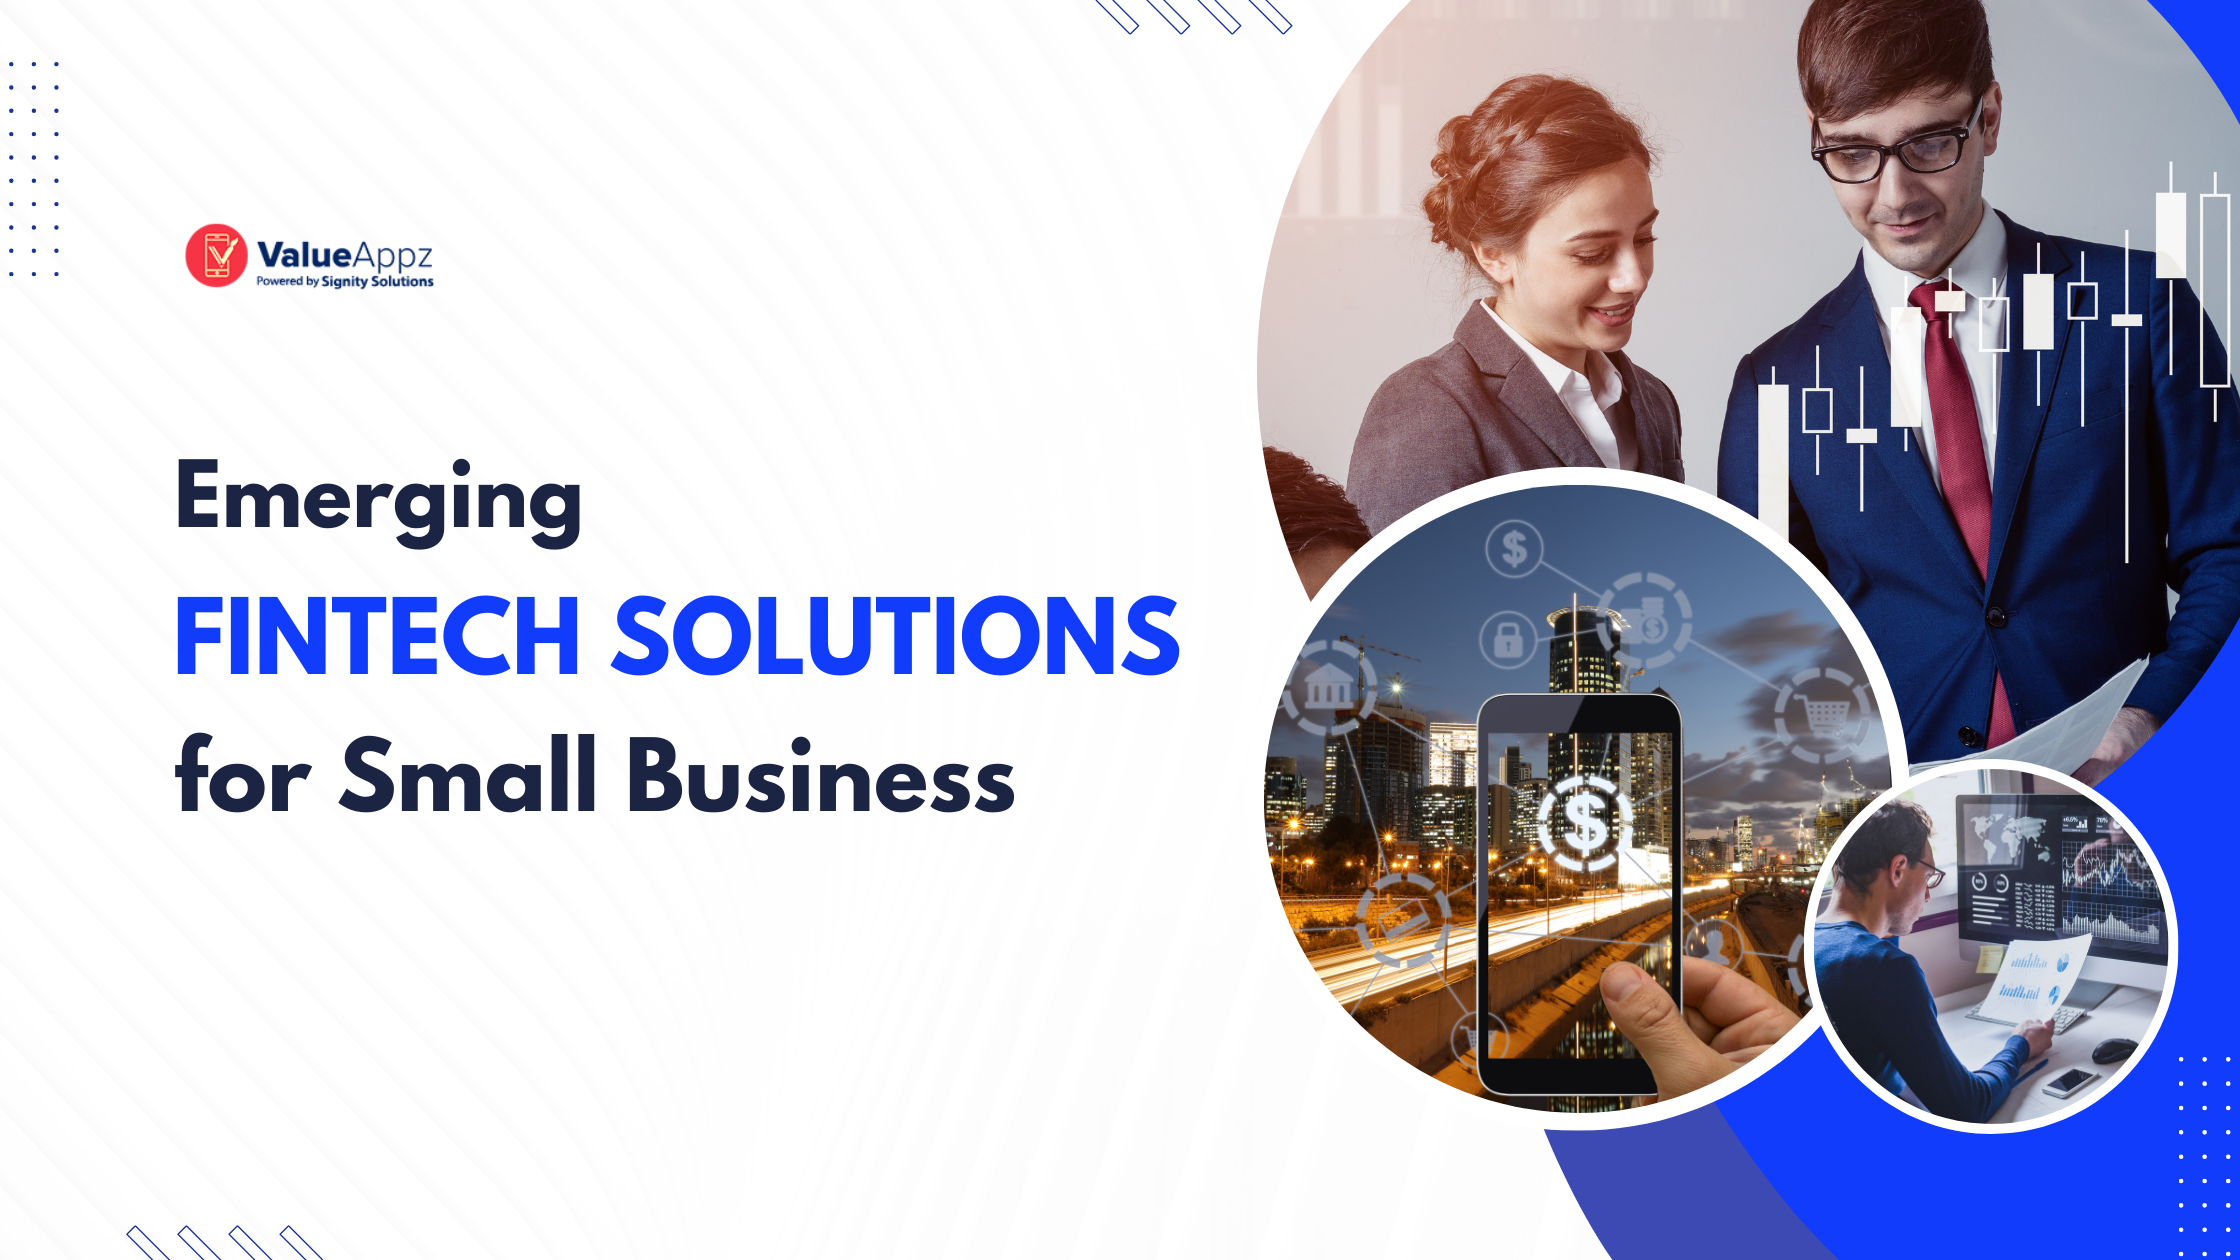 Emerging Fintech Solutions for Small Businesses